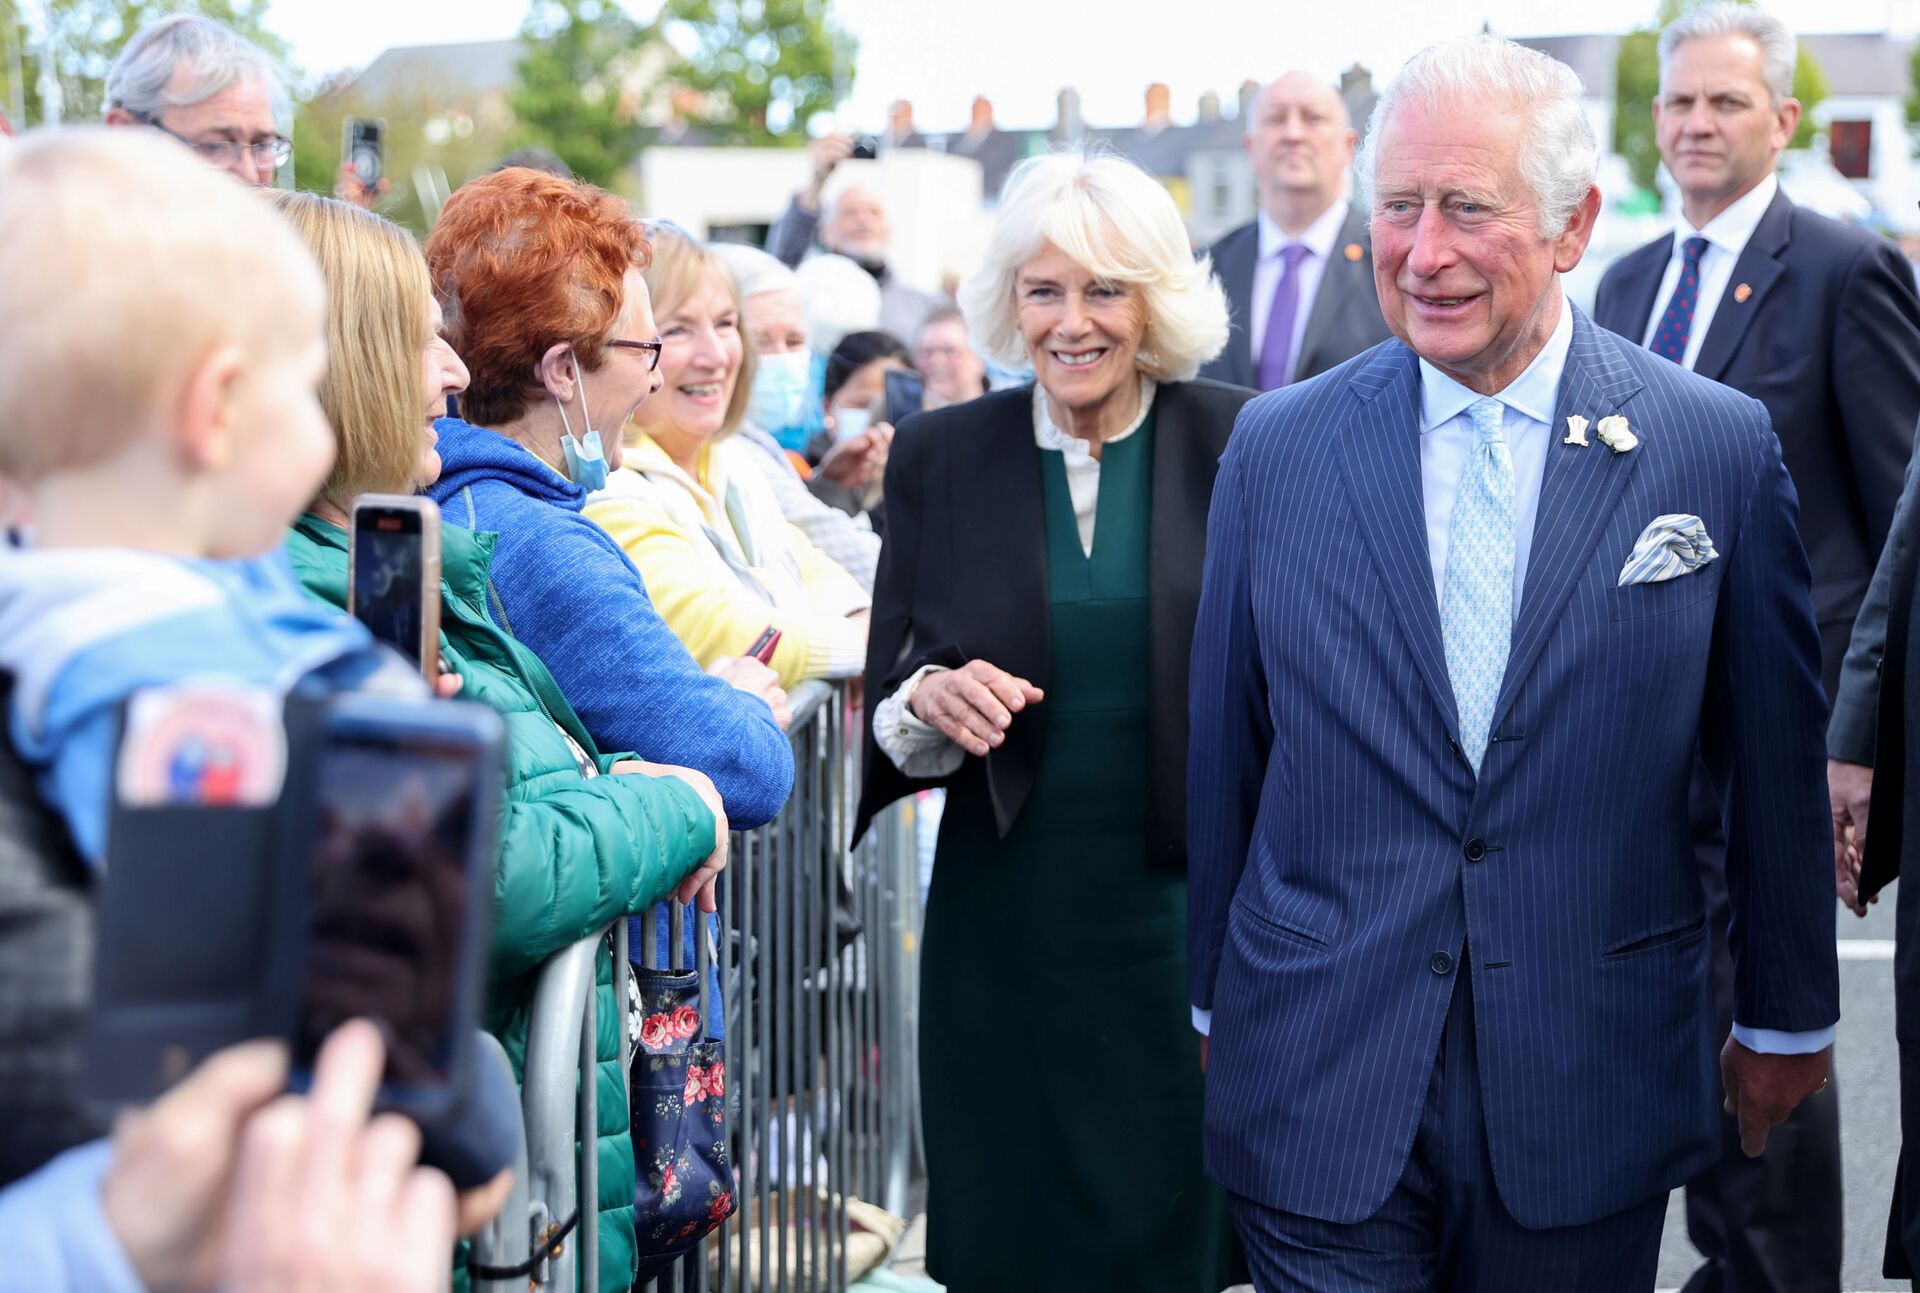 Britain's Prince Charles and Camilla, Duchess of Cornwall, meet well-wishers as they visit Bangor open air market, in Bangor, Northern Ireland, Britain May 19, 2021 - Sputnik International, 1920, 07.09.2021